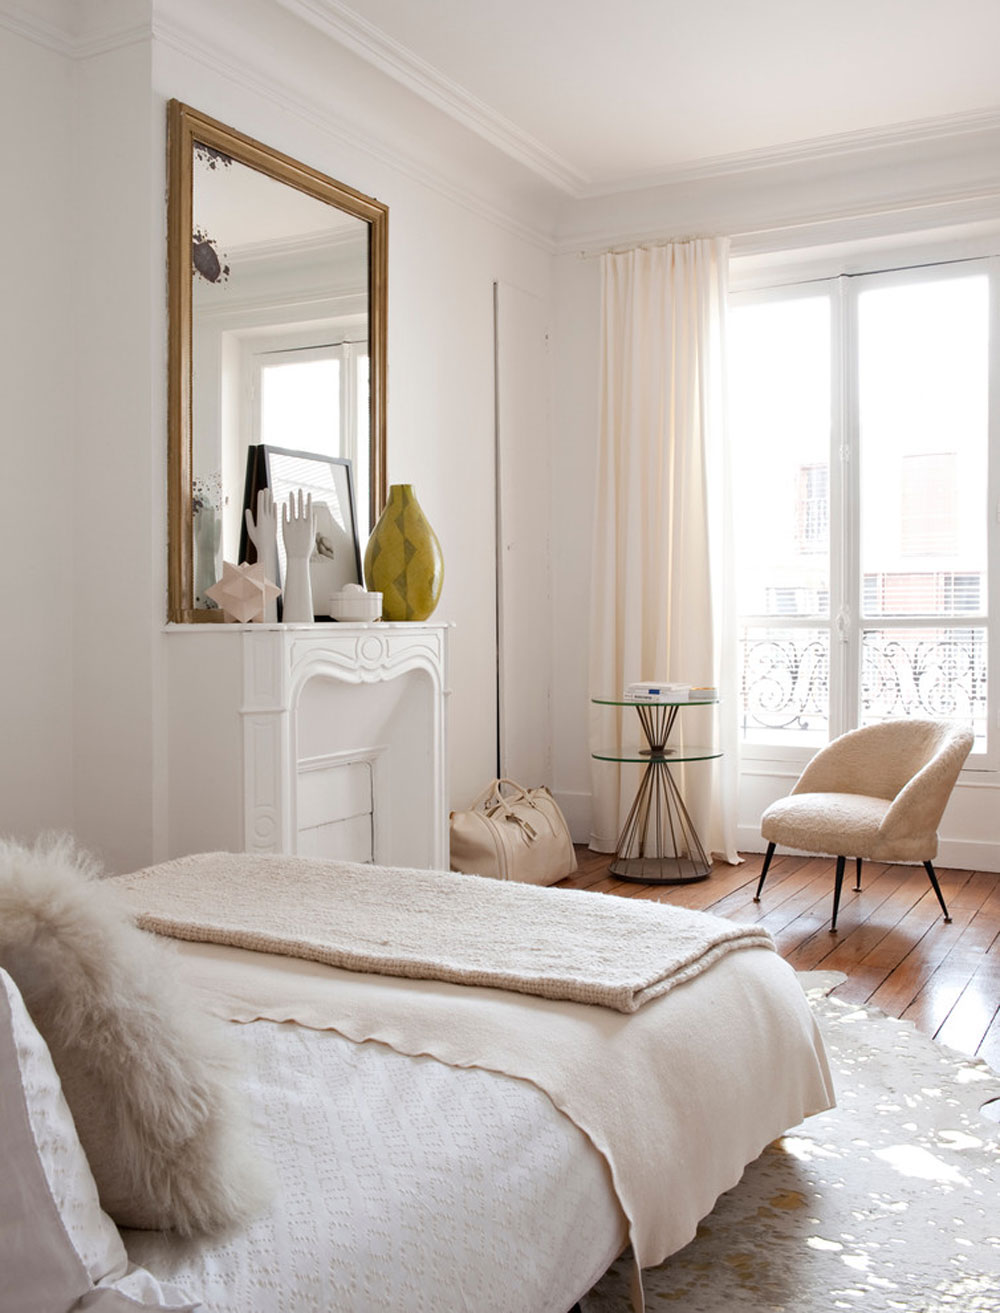 Appartement-Paris-by-be-attitude-2 Small apartment decorating ideas on a budget